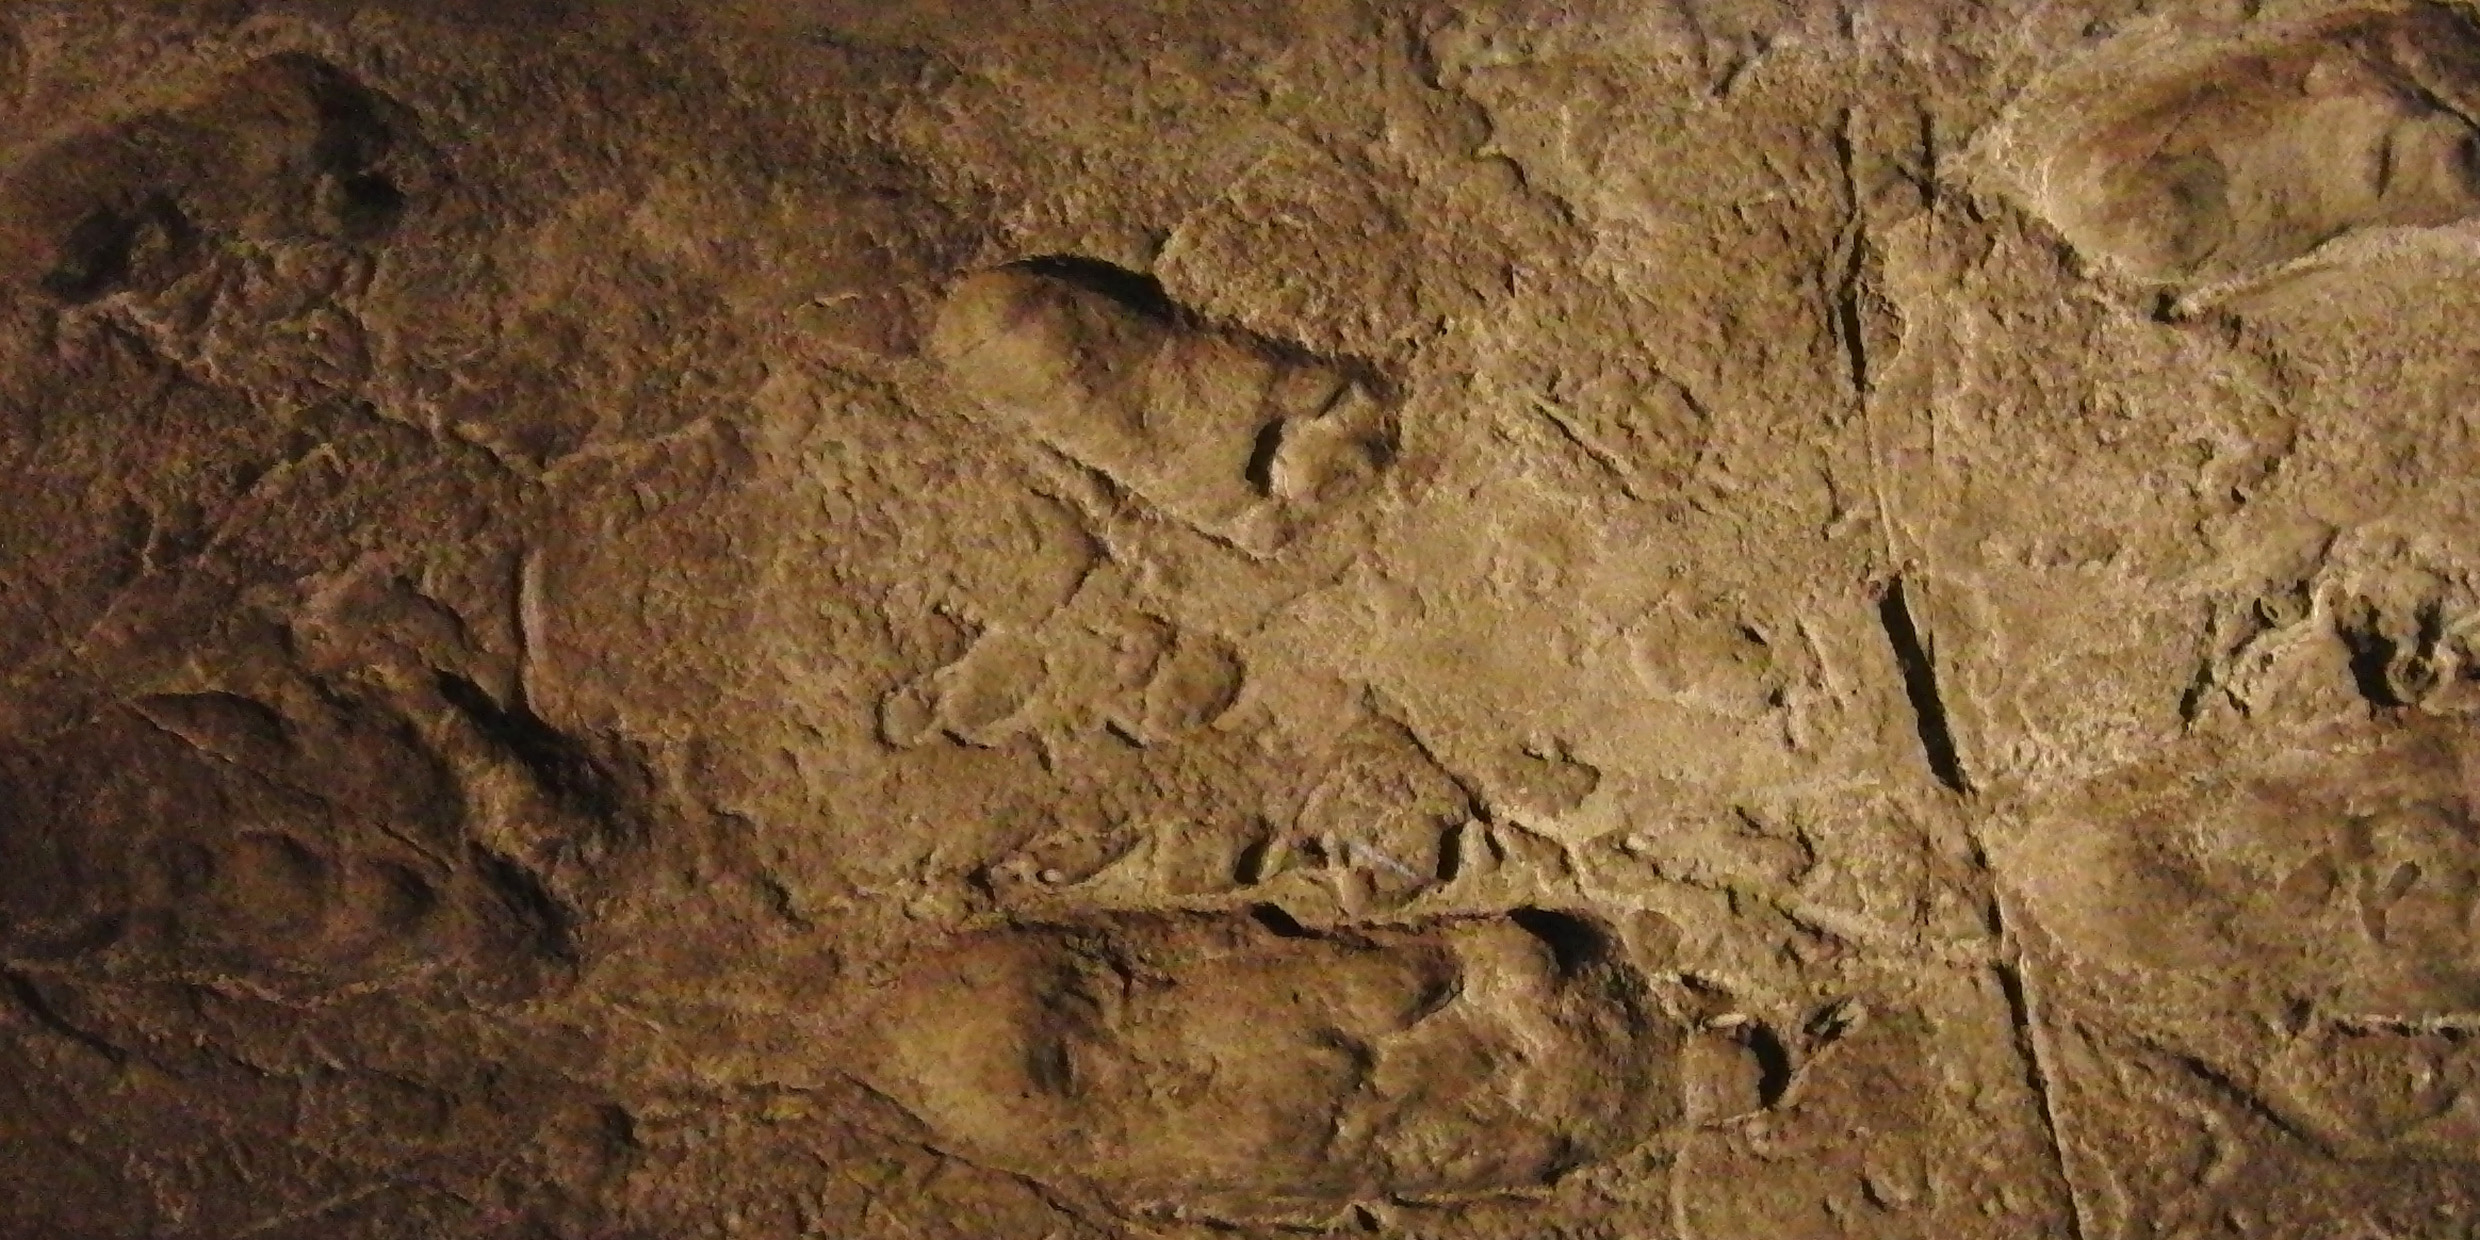 Image of footprints in clay